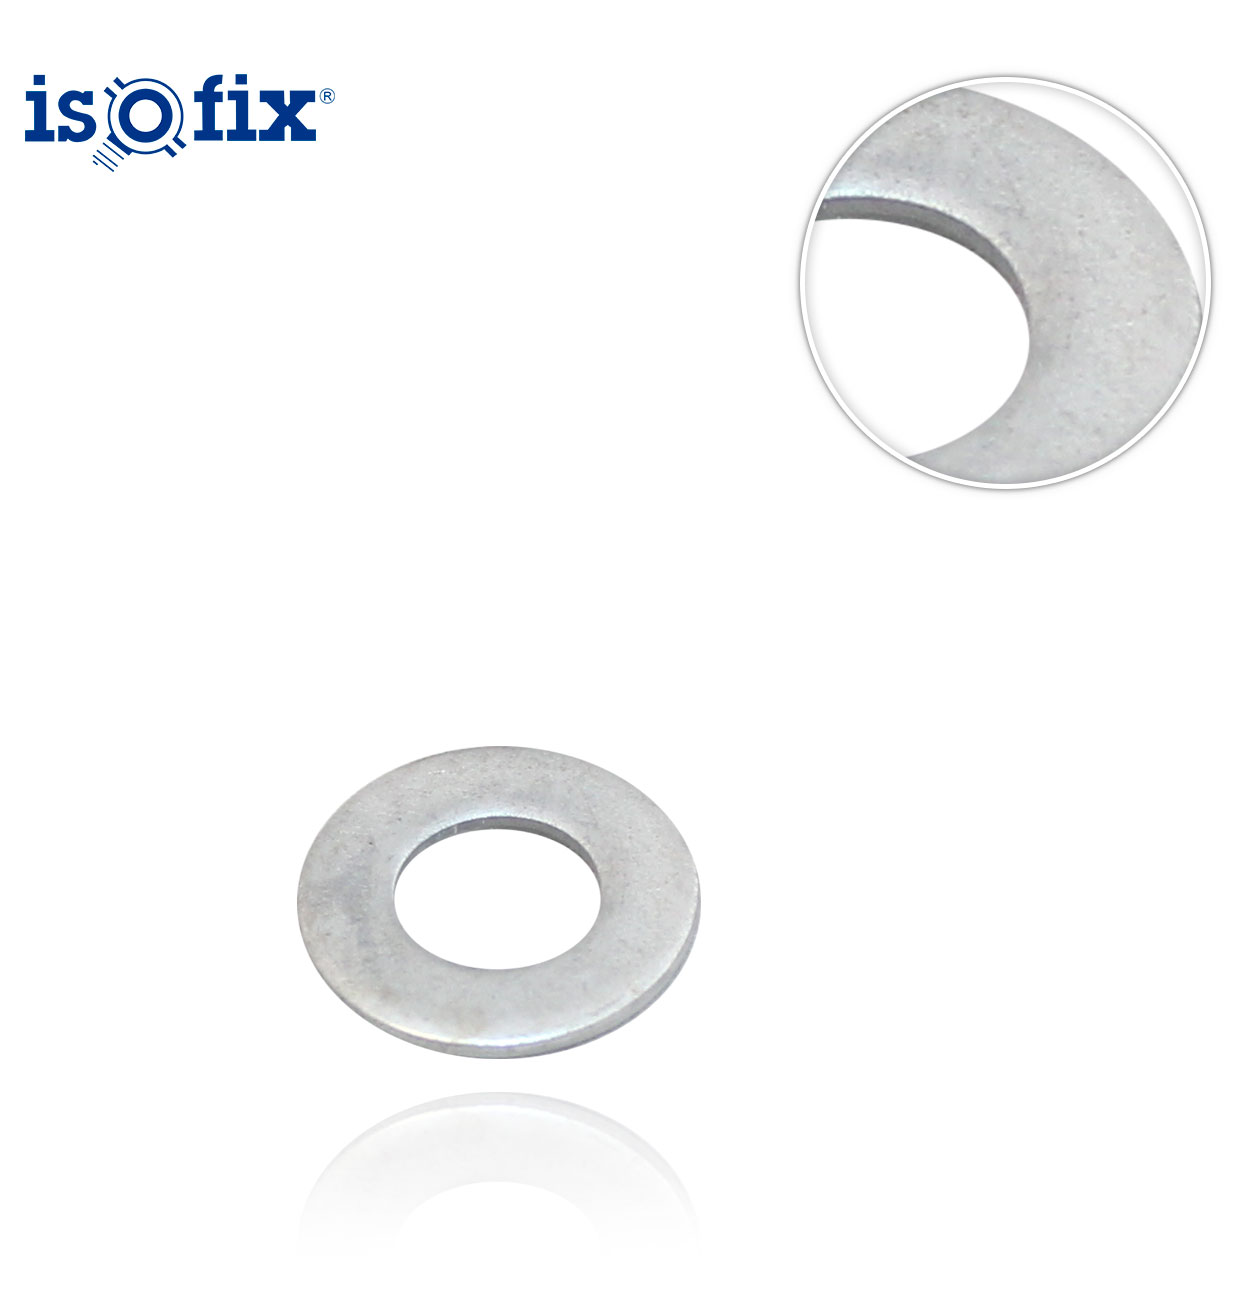 M-10 ** ZINC-PLATED HEX FLAT WASHER